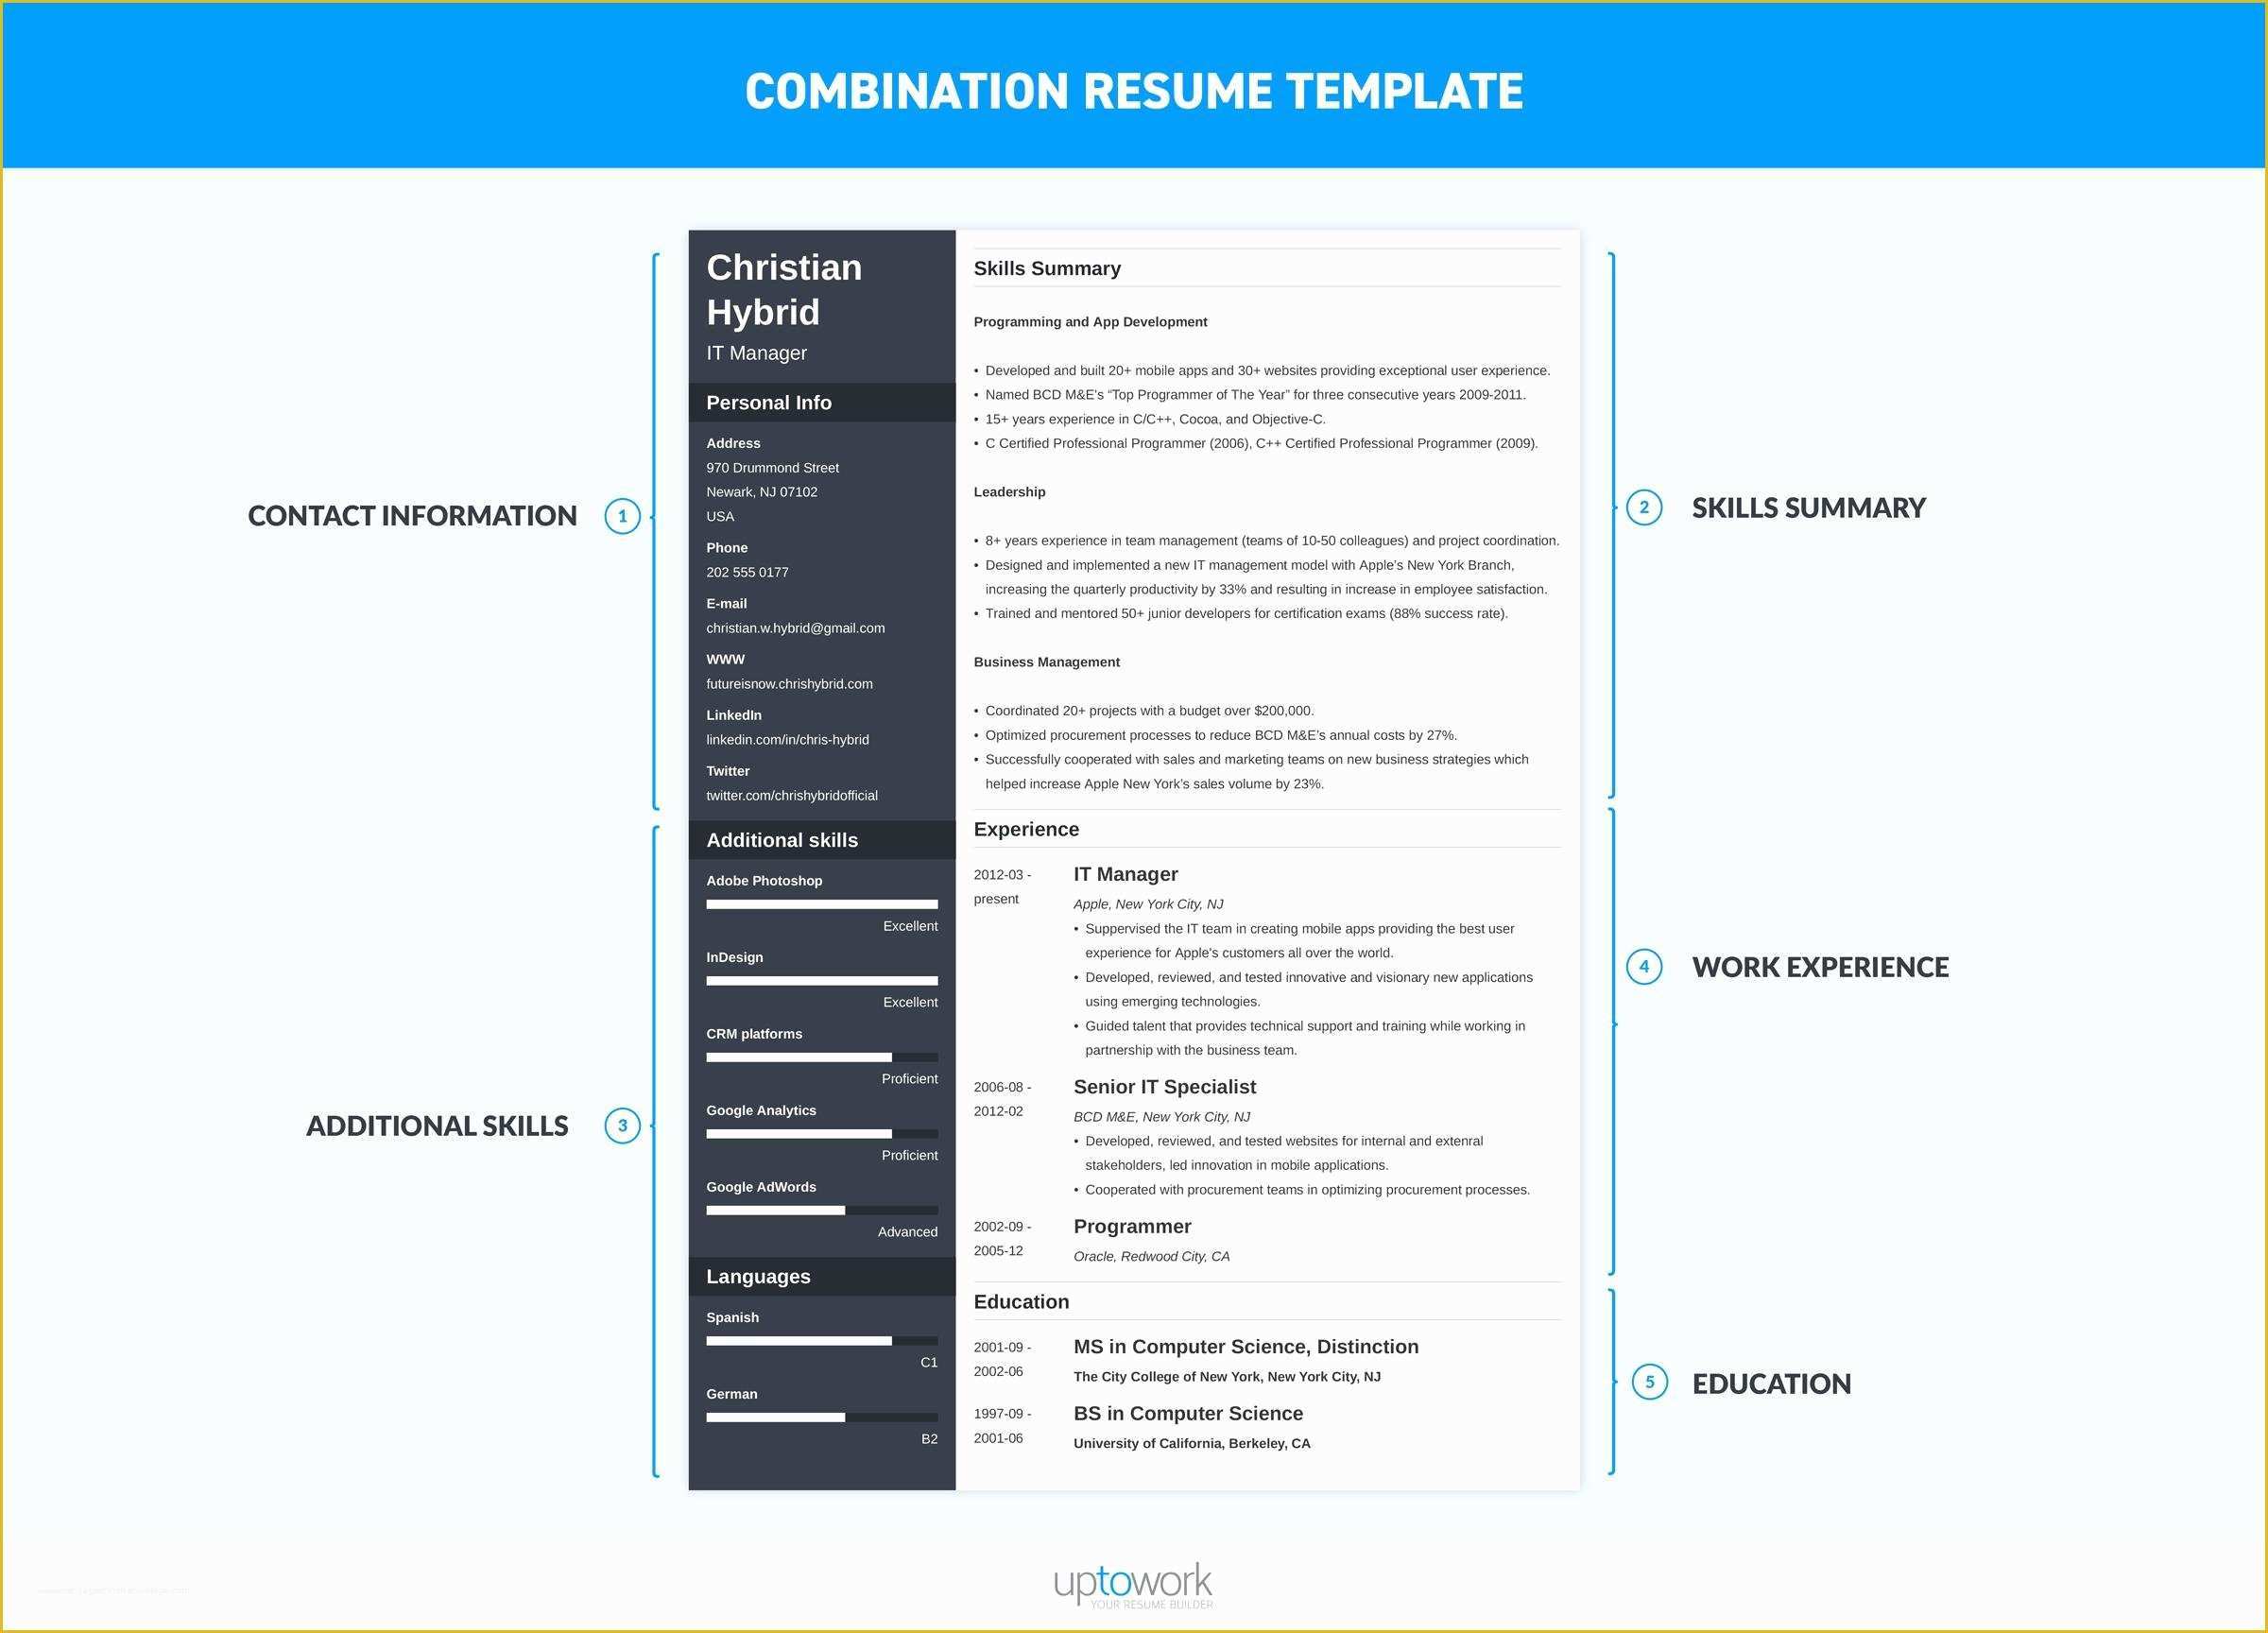 Free Combination Resume Template Of Resume formats Pick the Best E In 3 Steps Examples